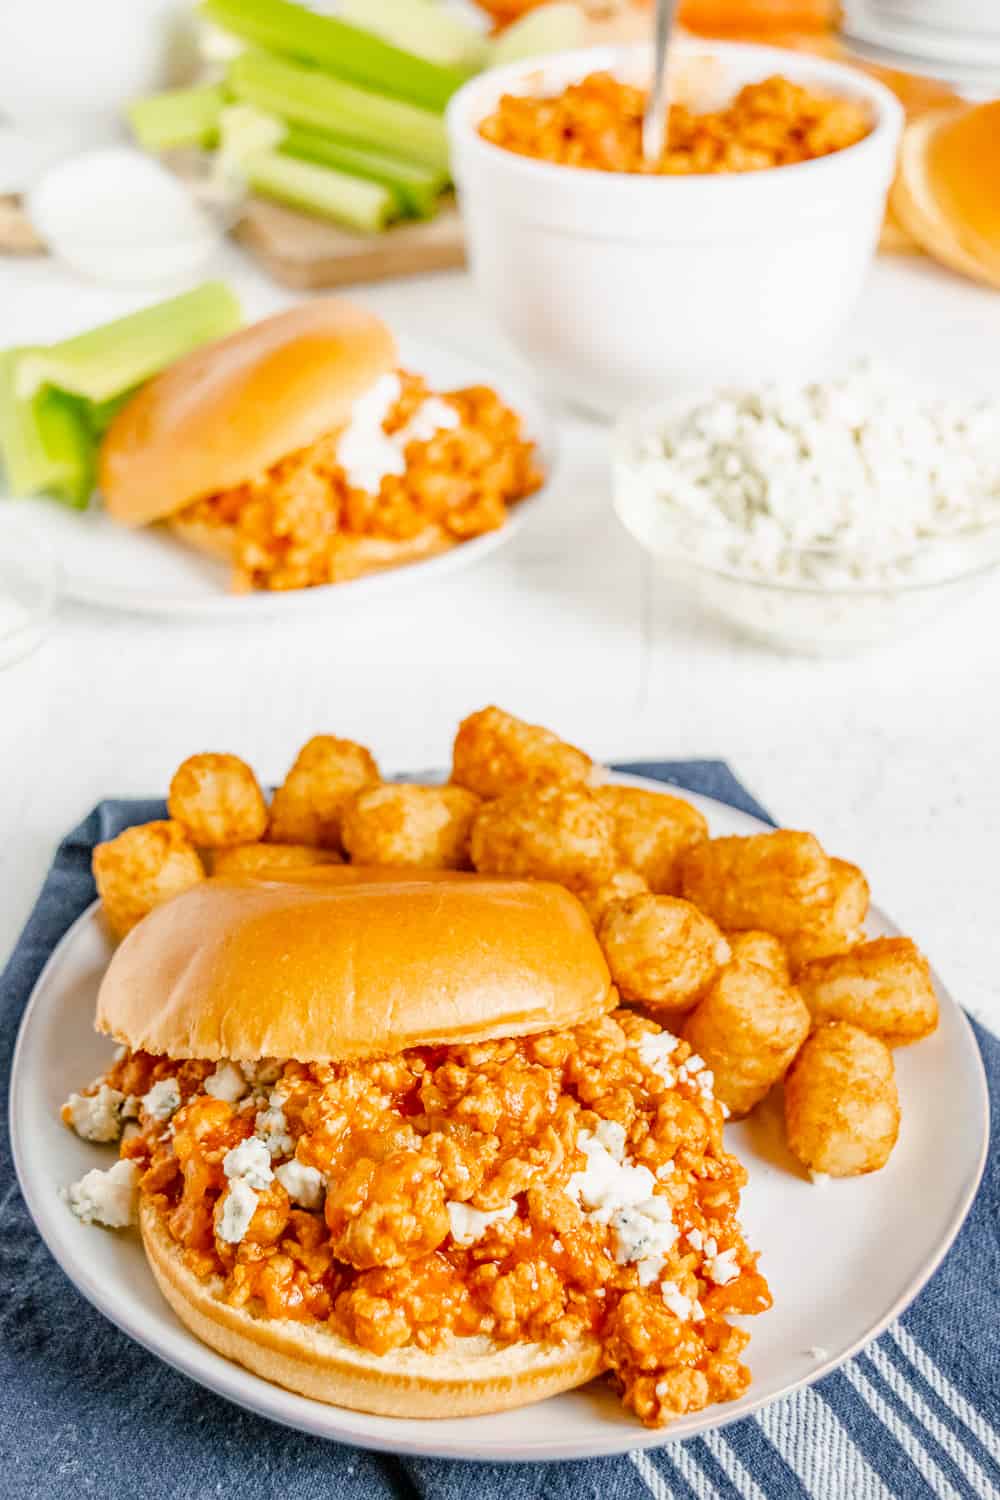 Buffalo chicken on a roll with tater tots on the side.